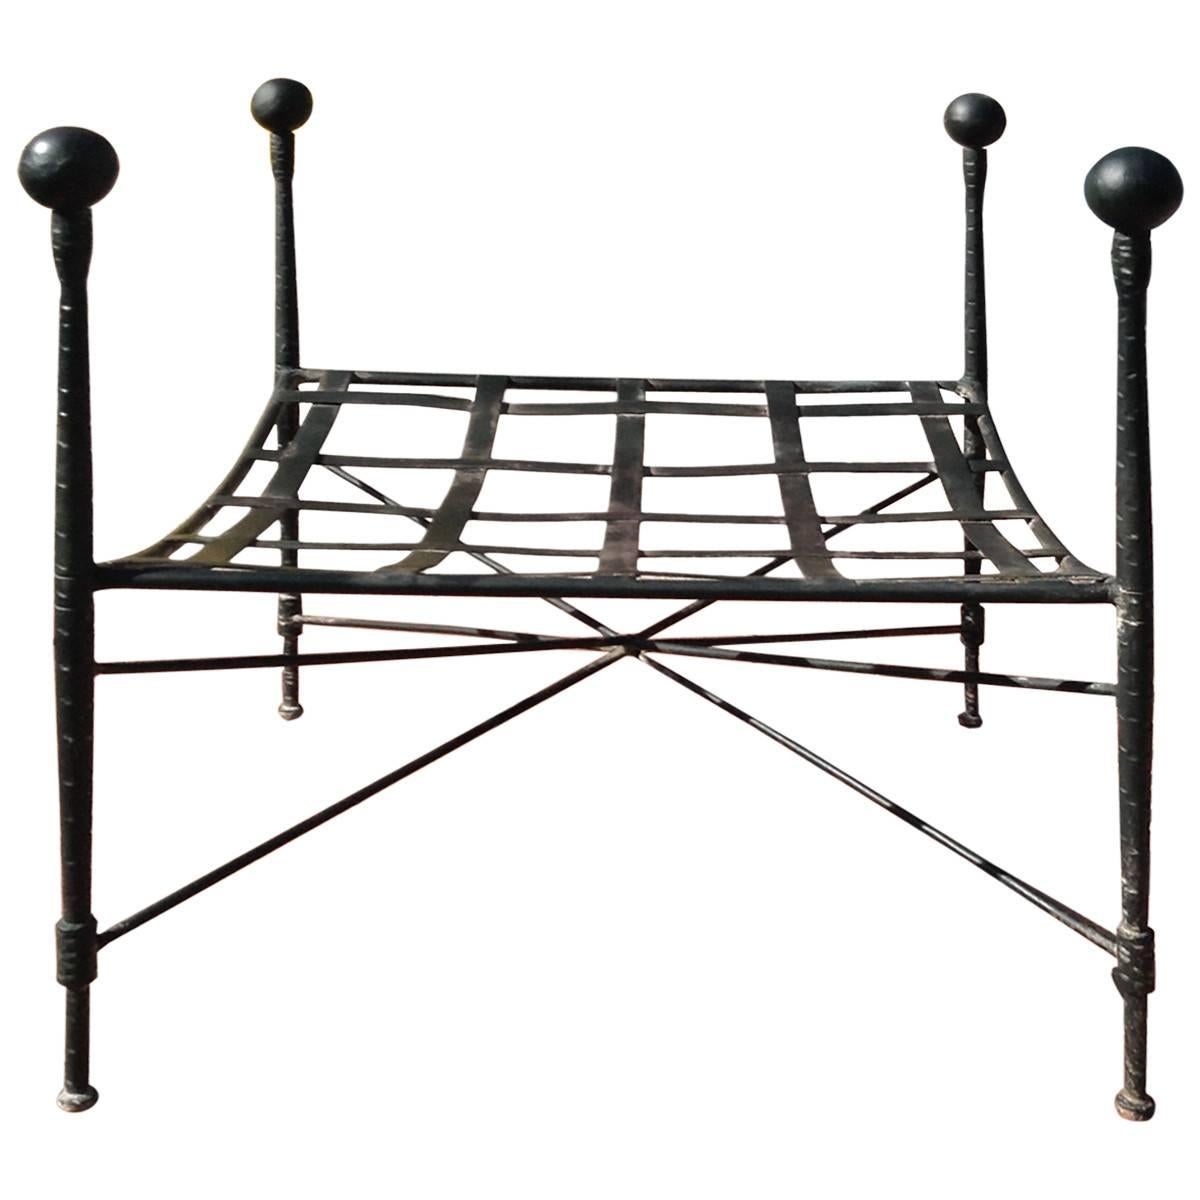 Salterini antiques specializes wirework and wrought iron furniture made in Salterini, simple but sleek, this eye-catching openwork ottoman is composed of patinated wrought iron and features a rich black finish and decorative ball finials. Designed